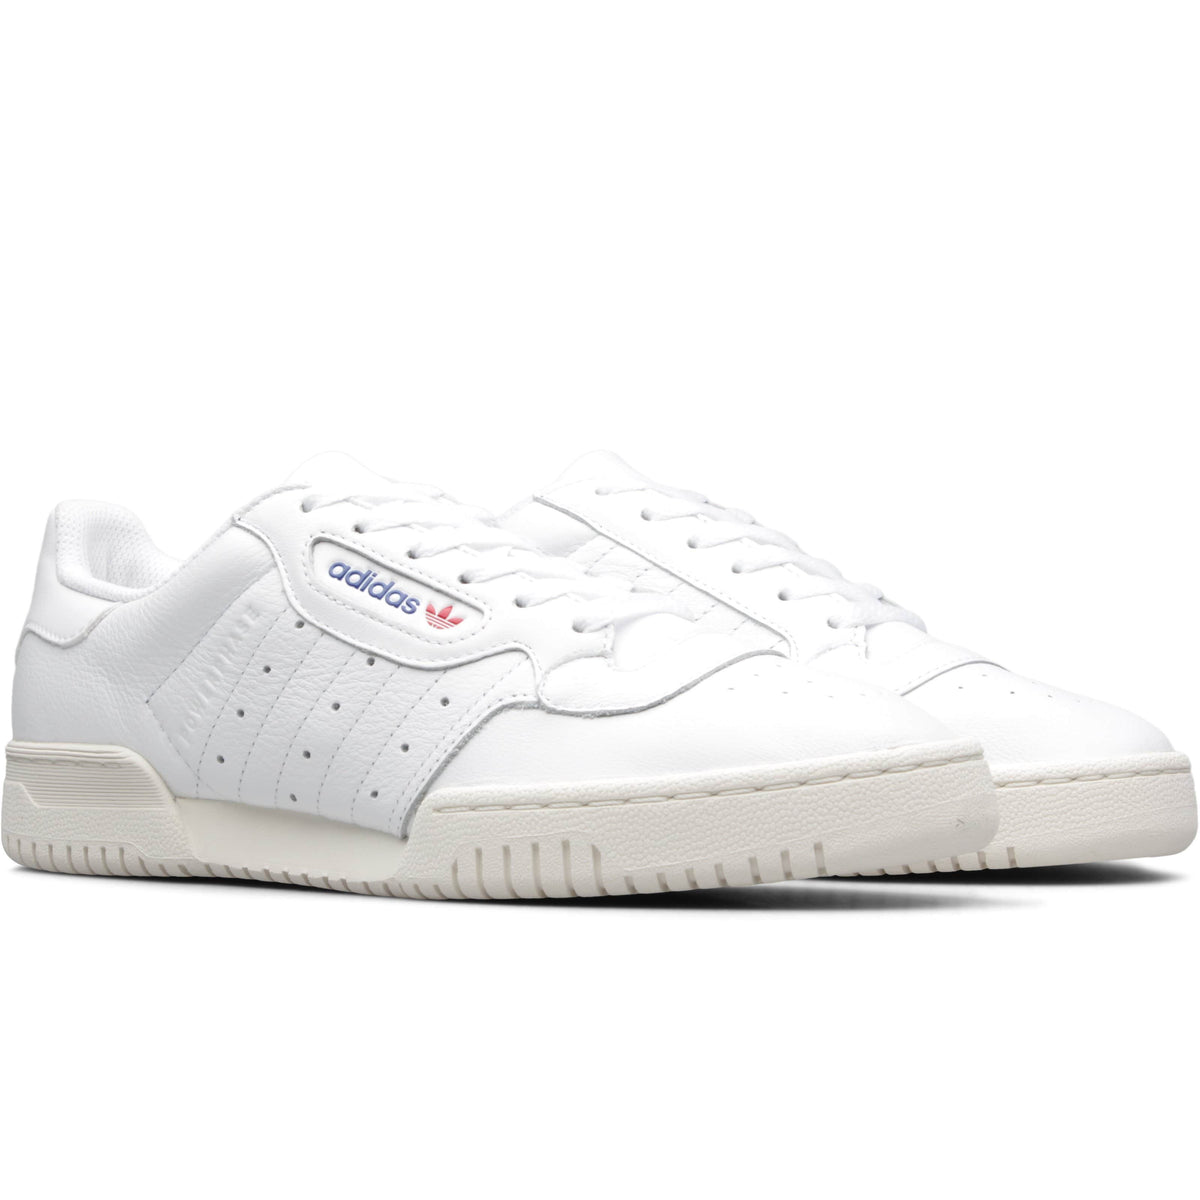 POWERPHASE Cloud White/Cloud White/Off 